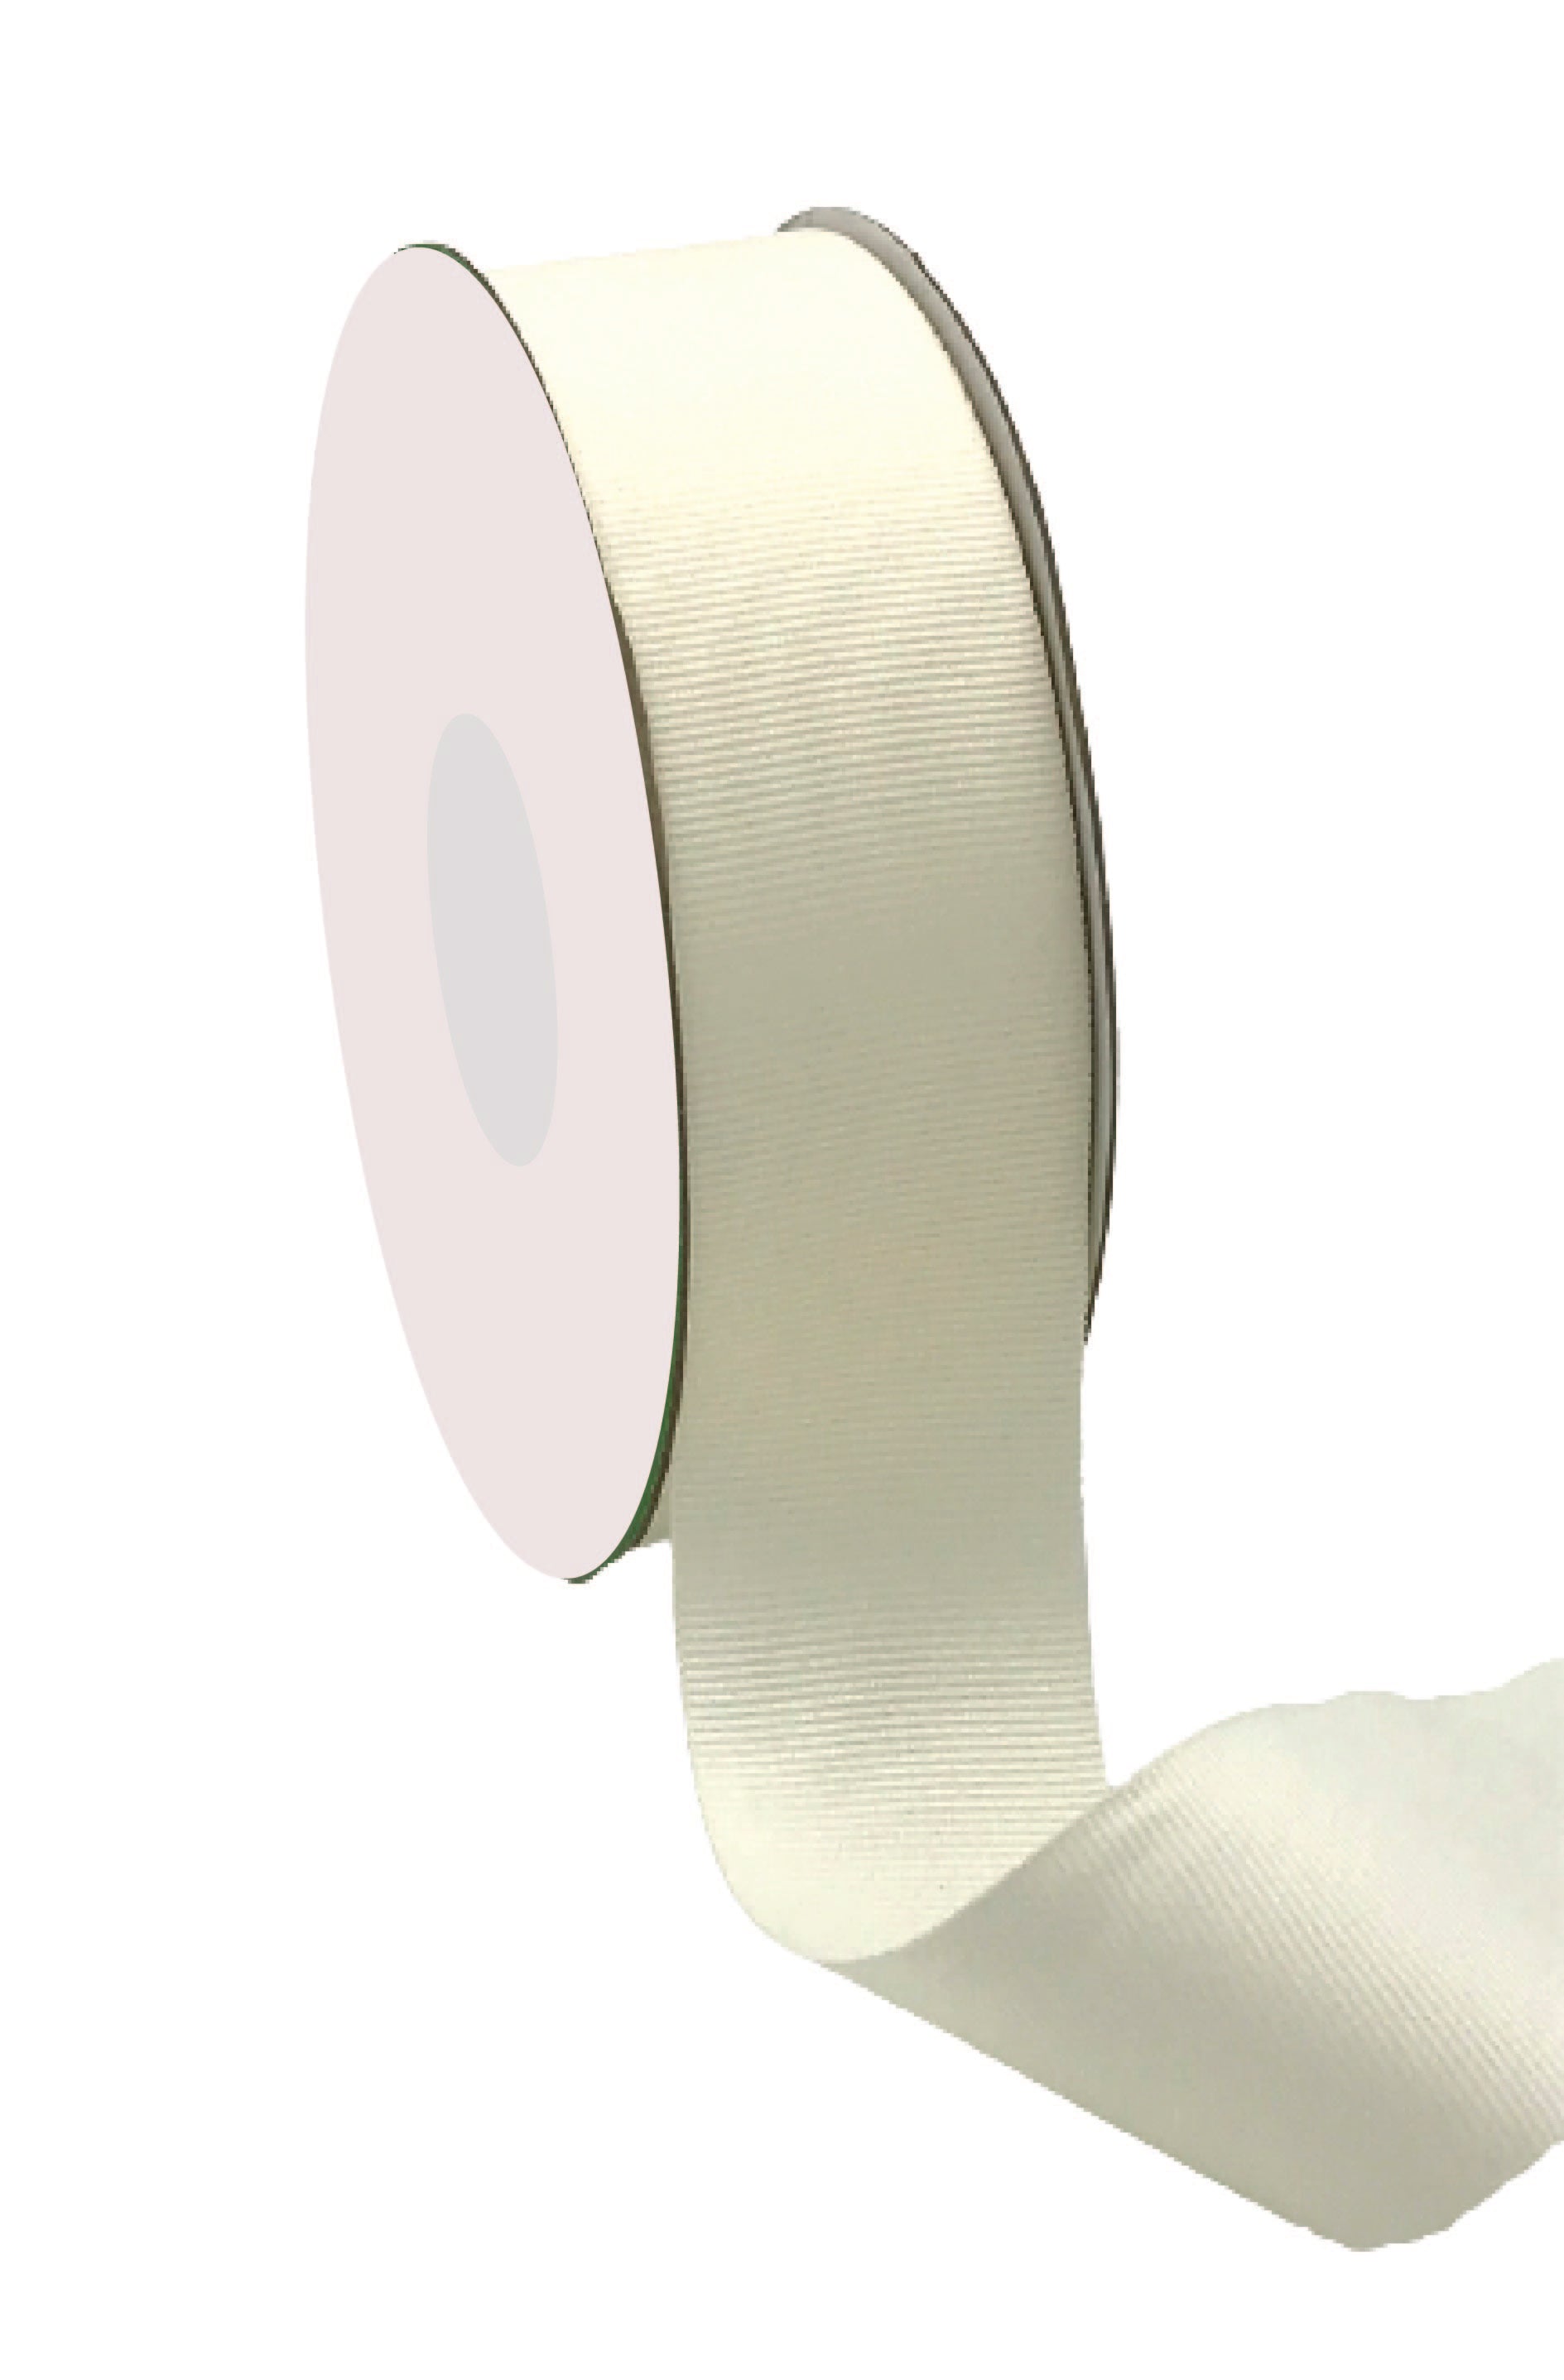 1.5 Inch, Light-Weight Flat Grosgrain Ribbon with Woven Edge, 27 yards